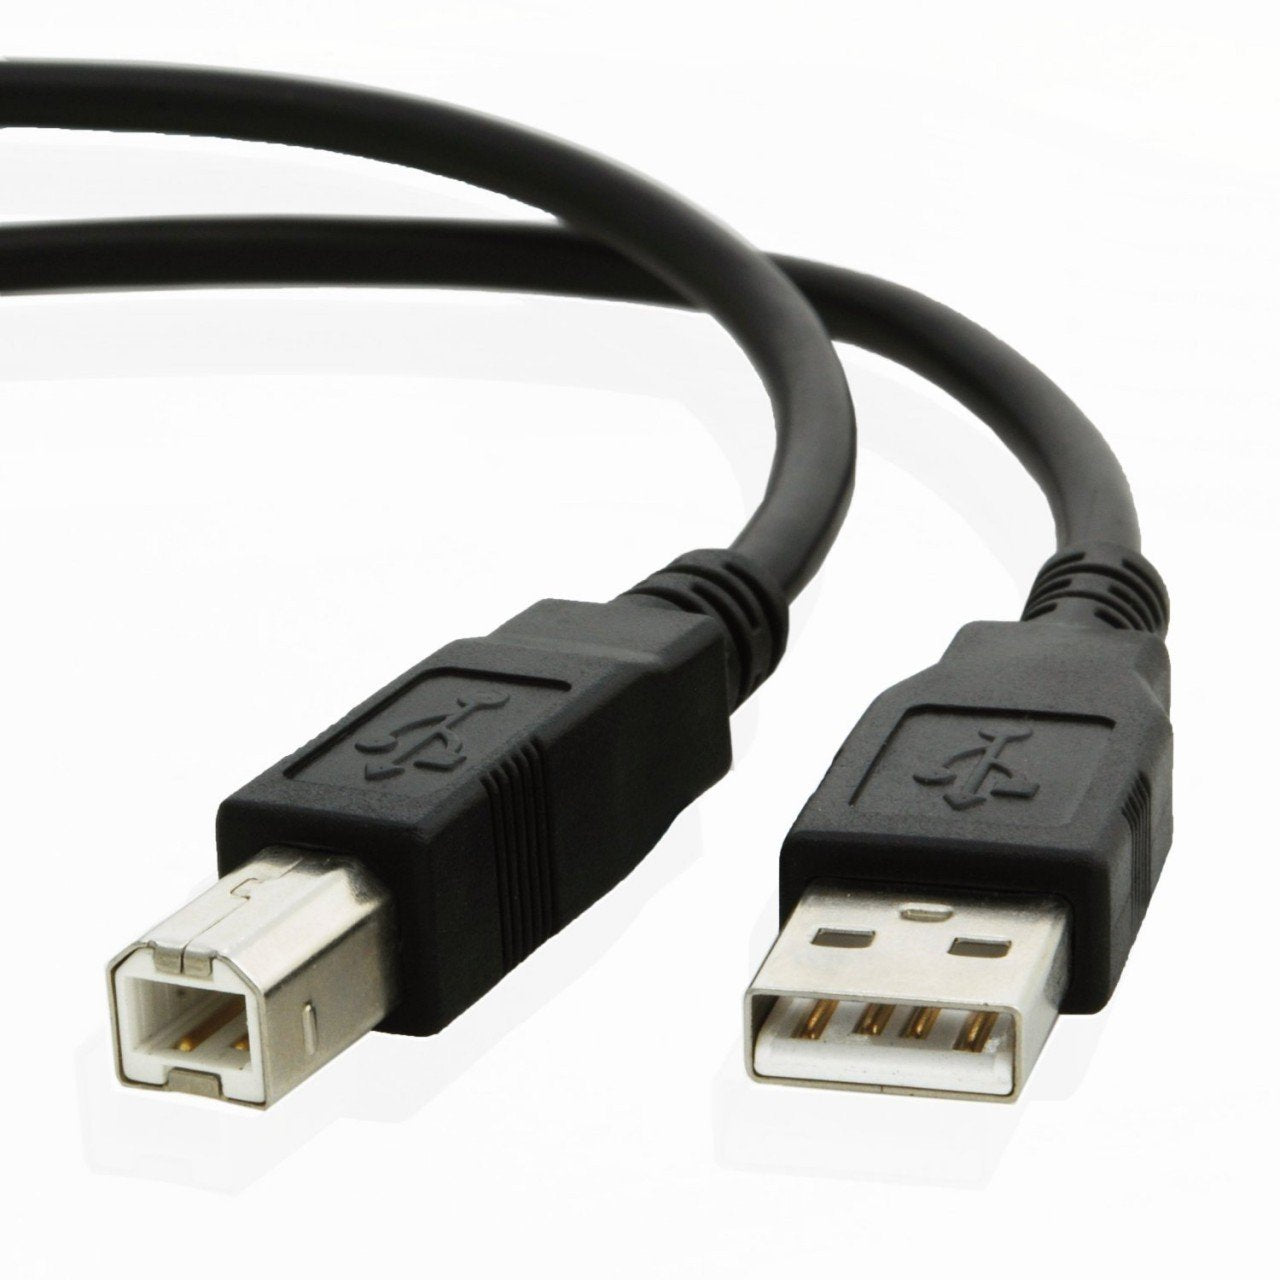 USB cable for Canon PIXMA MG5420